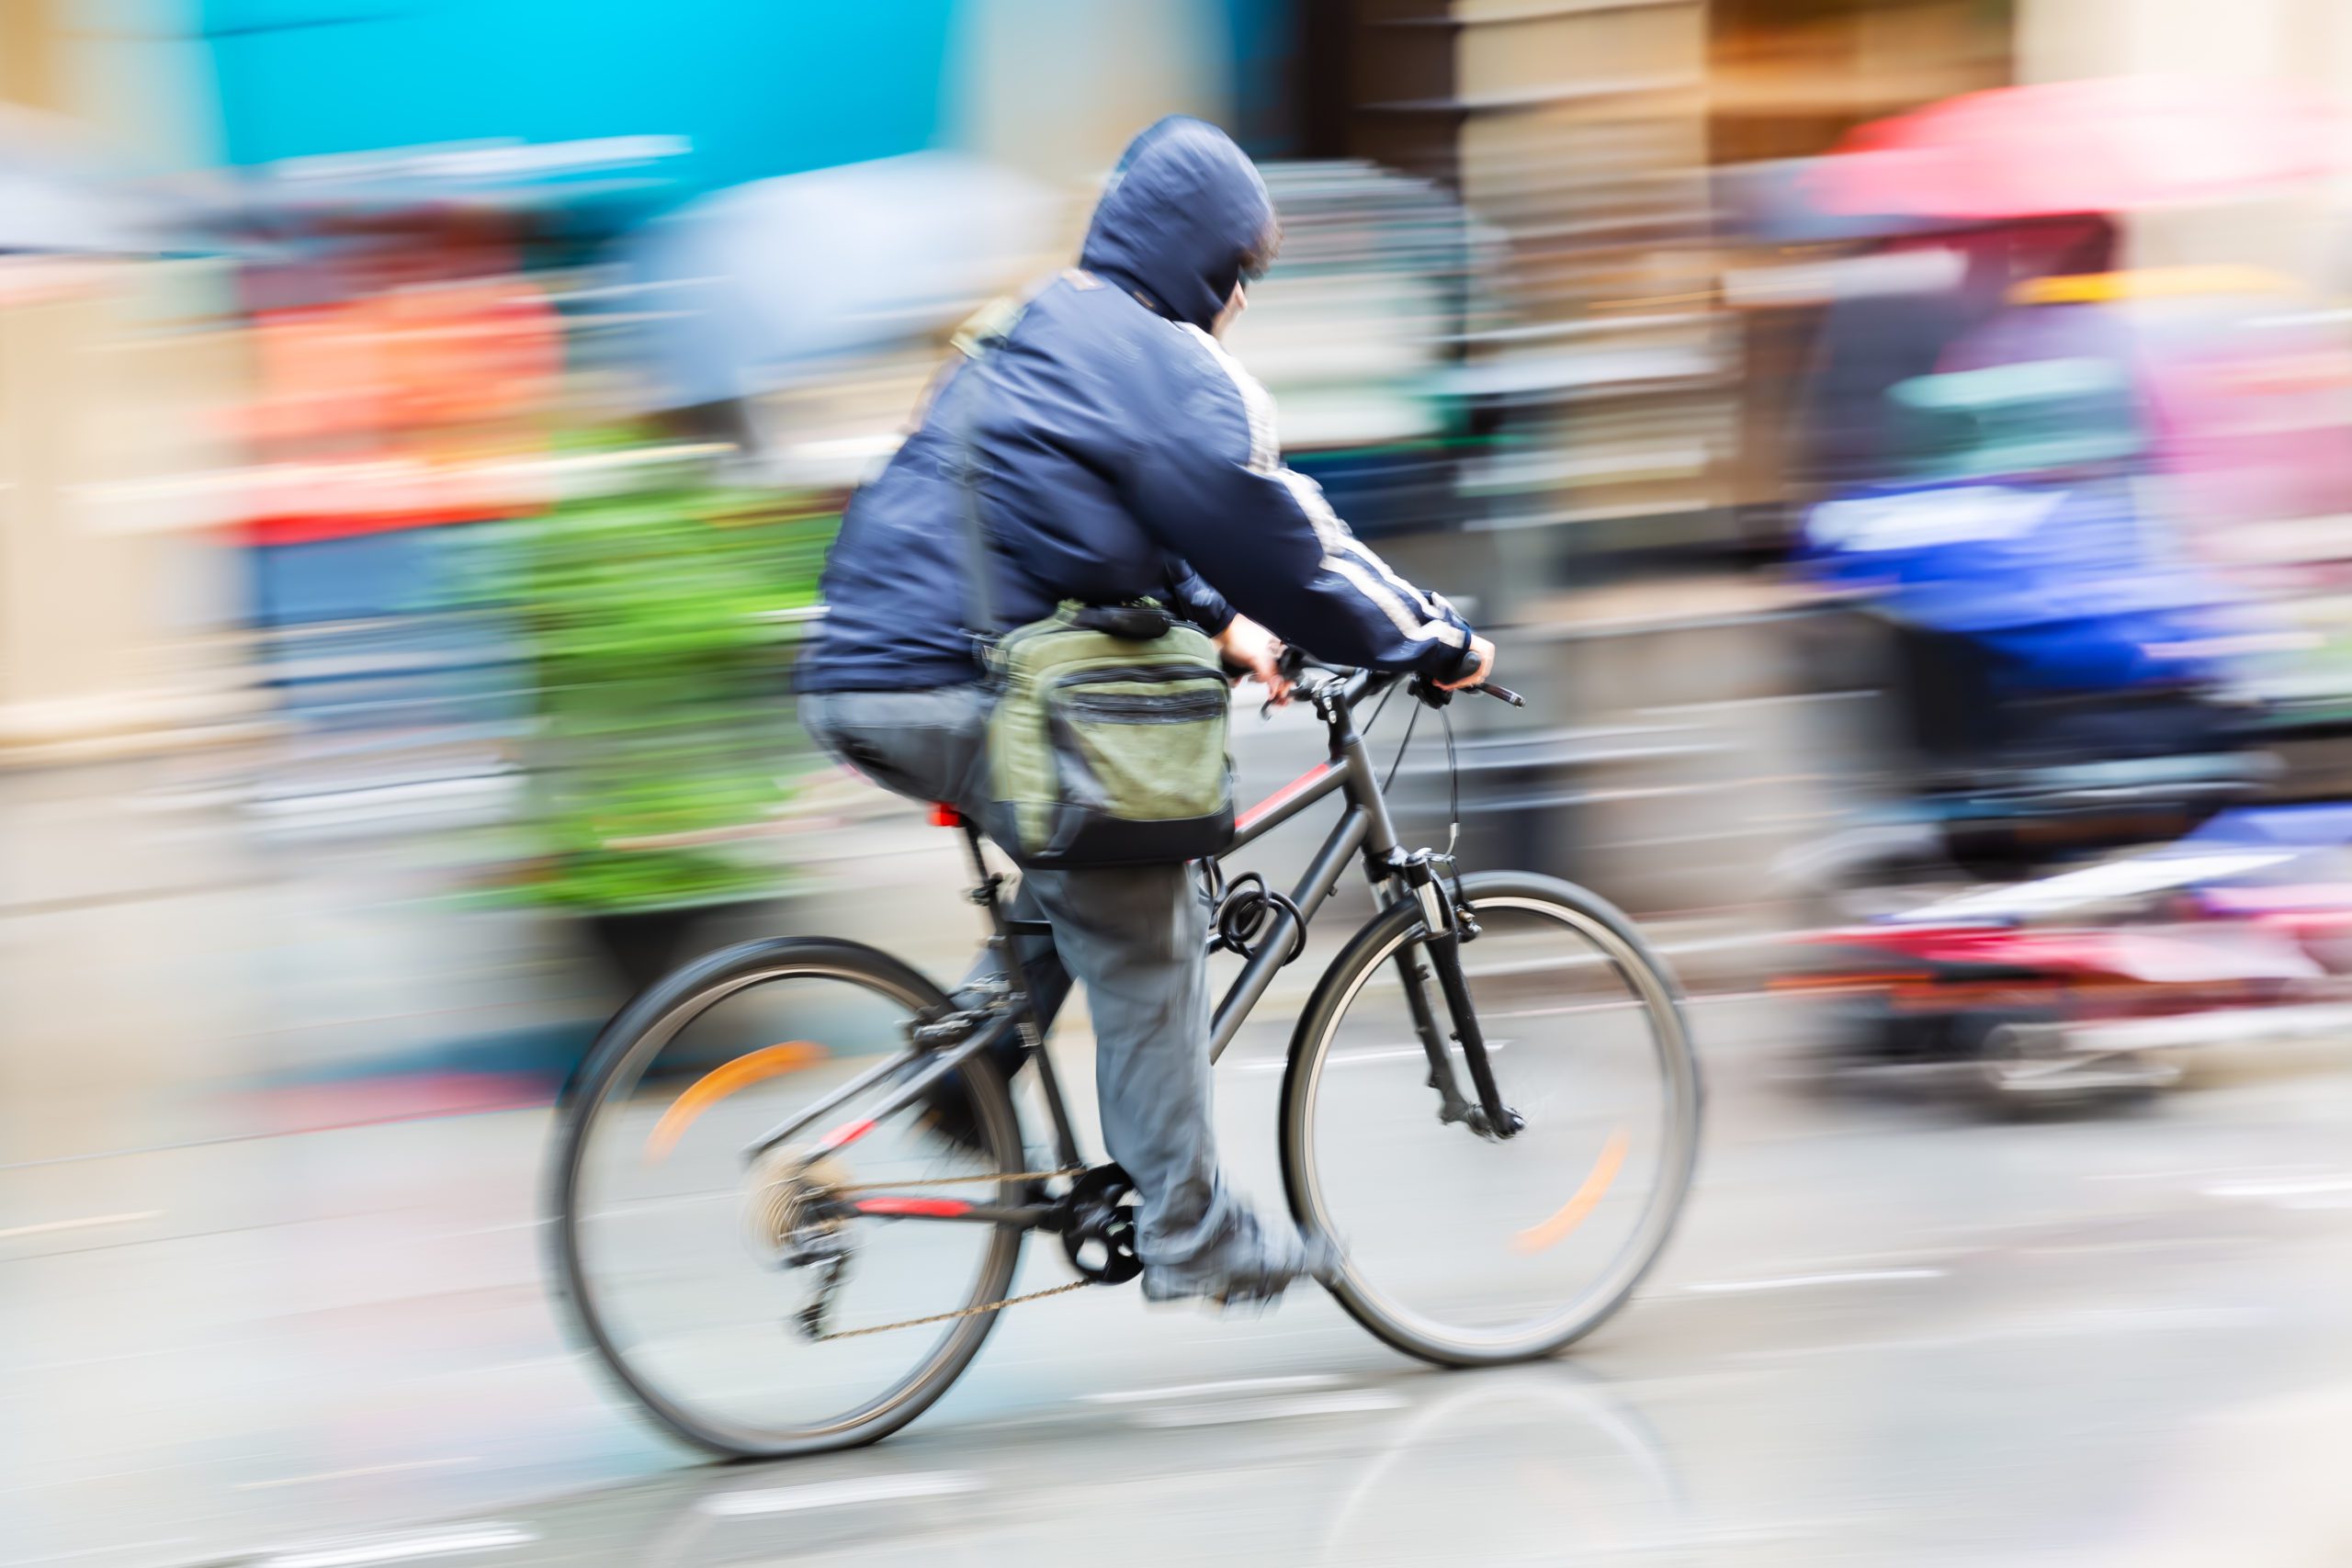 Montana Bicycle Laws: What You Need to Know to Safely Ride Your Bike